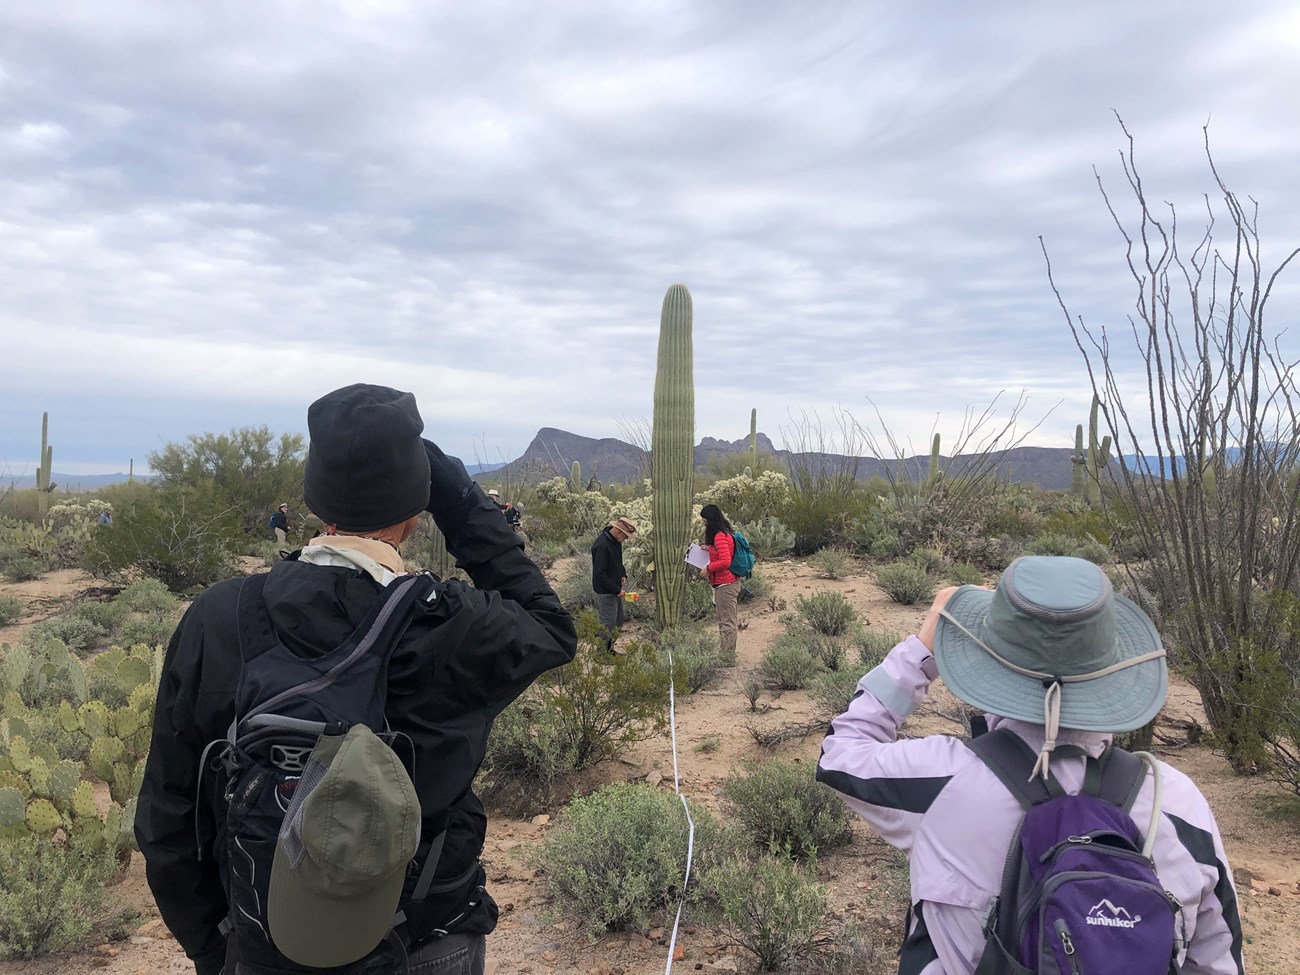 Two volunteers using a clinometer to measure the height of a saguaro in front of them.